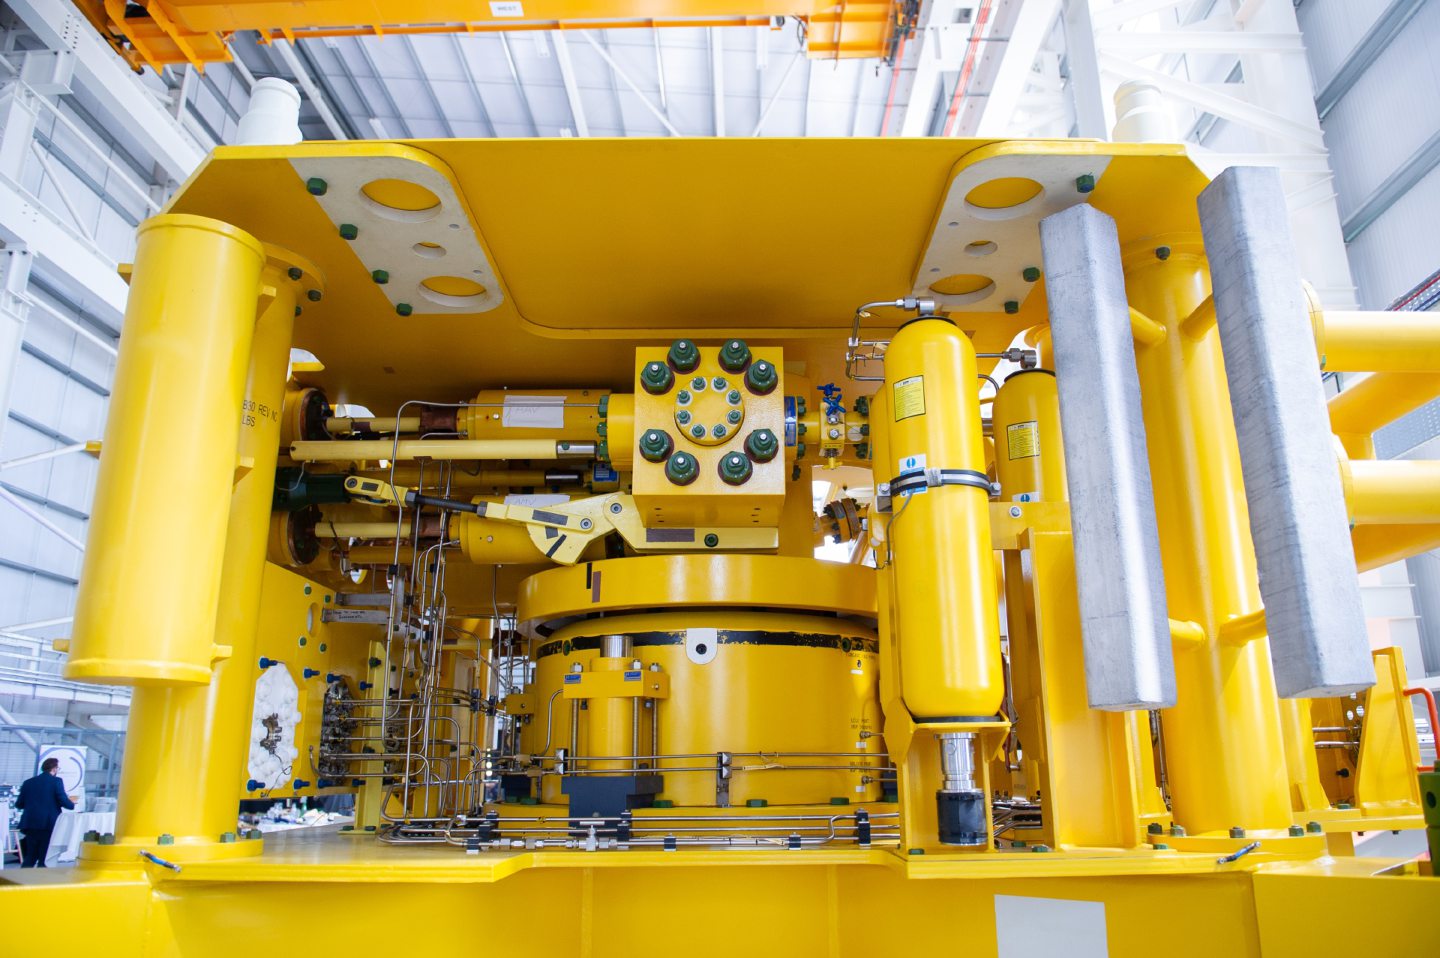 Subsea equipment designed and manufactured at Baker Hughes Montrose.